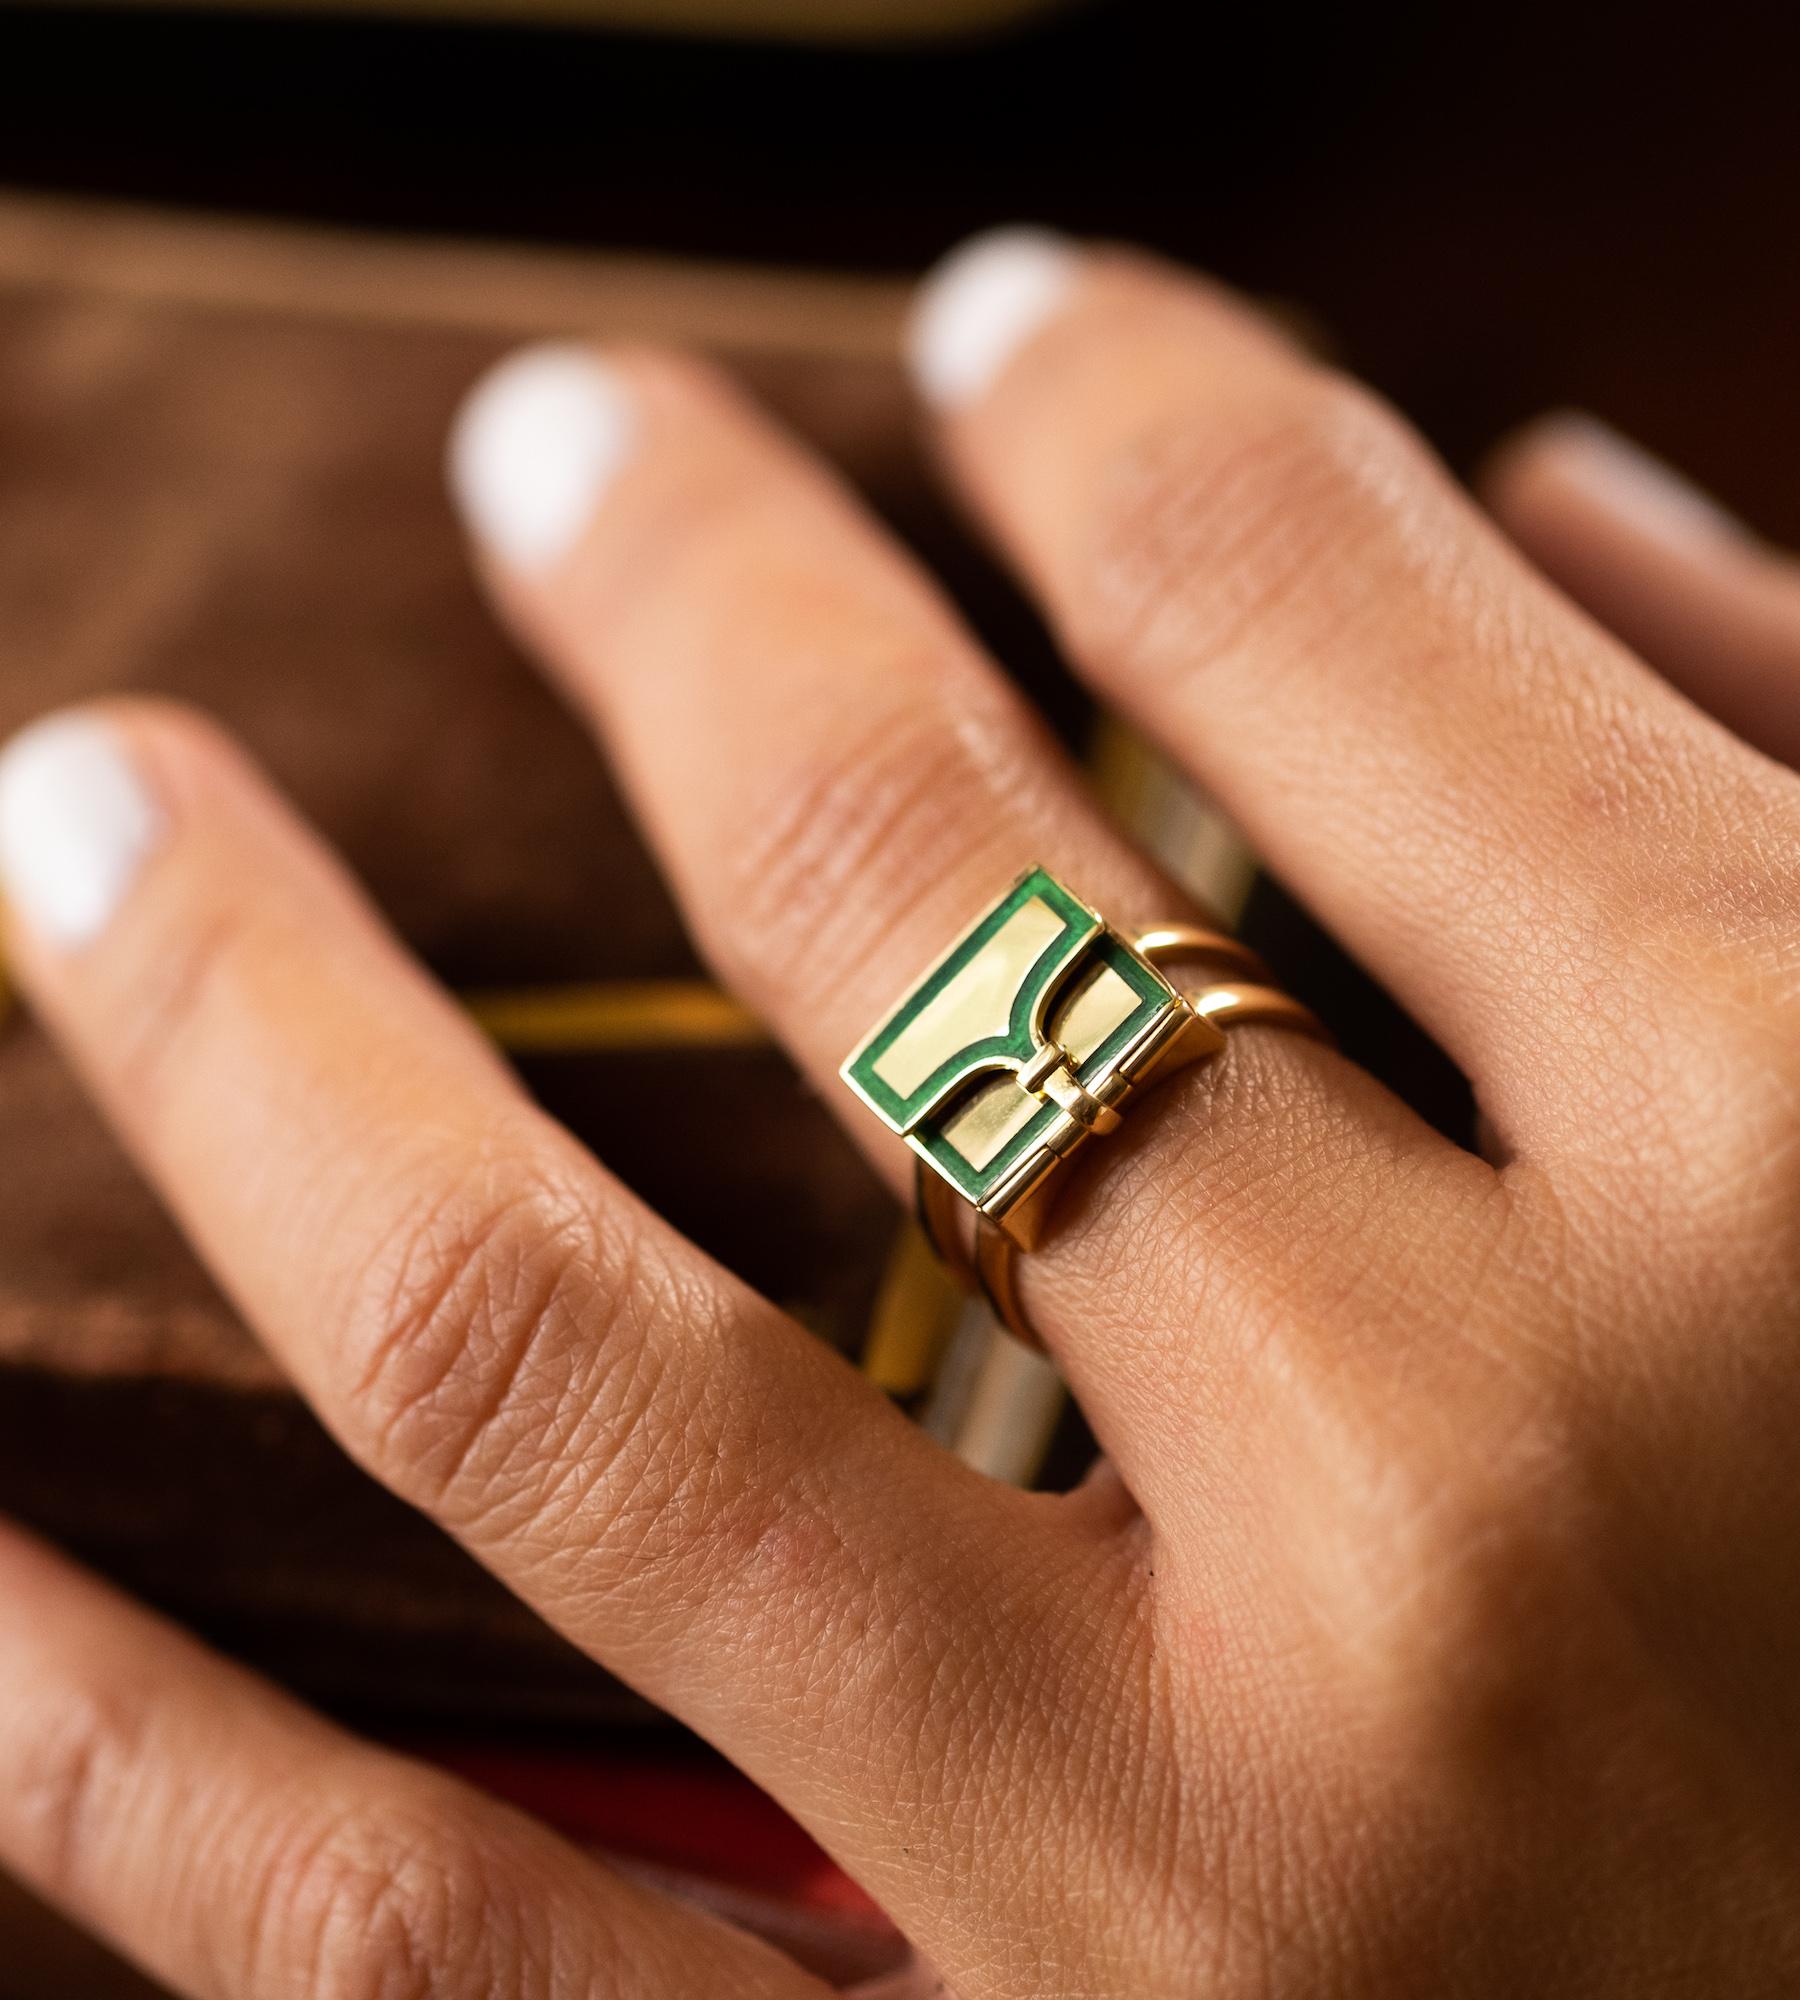 The Fleur Fairfax Book Ring in 18ct Gold and Enamel - Serpentine Green US 6.25 For Sale 1